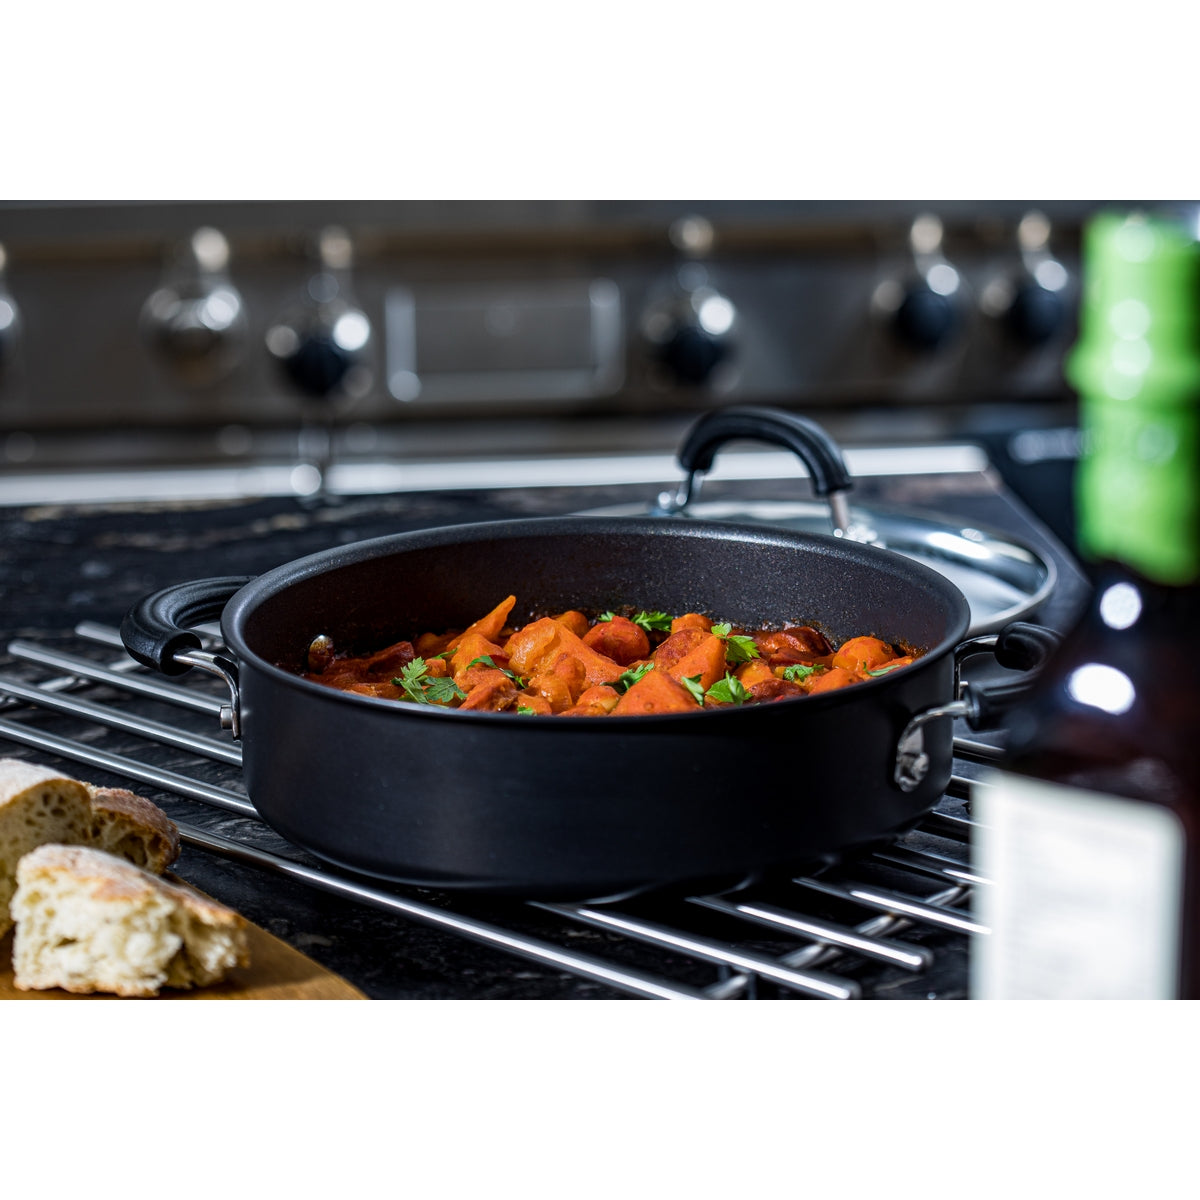 24cm anodized casserole dish is perfect for hob to oven cooking